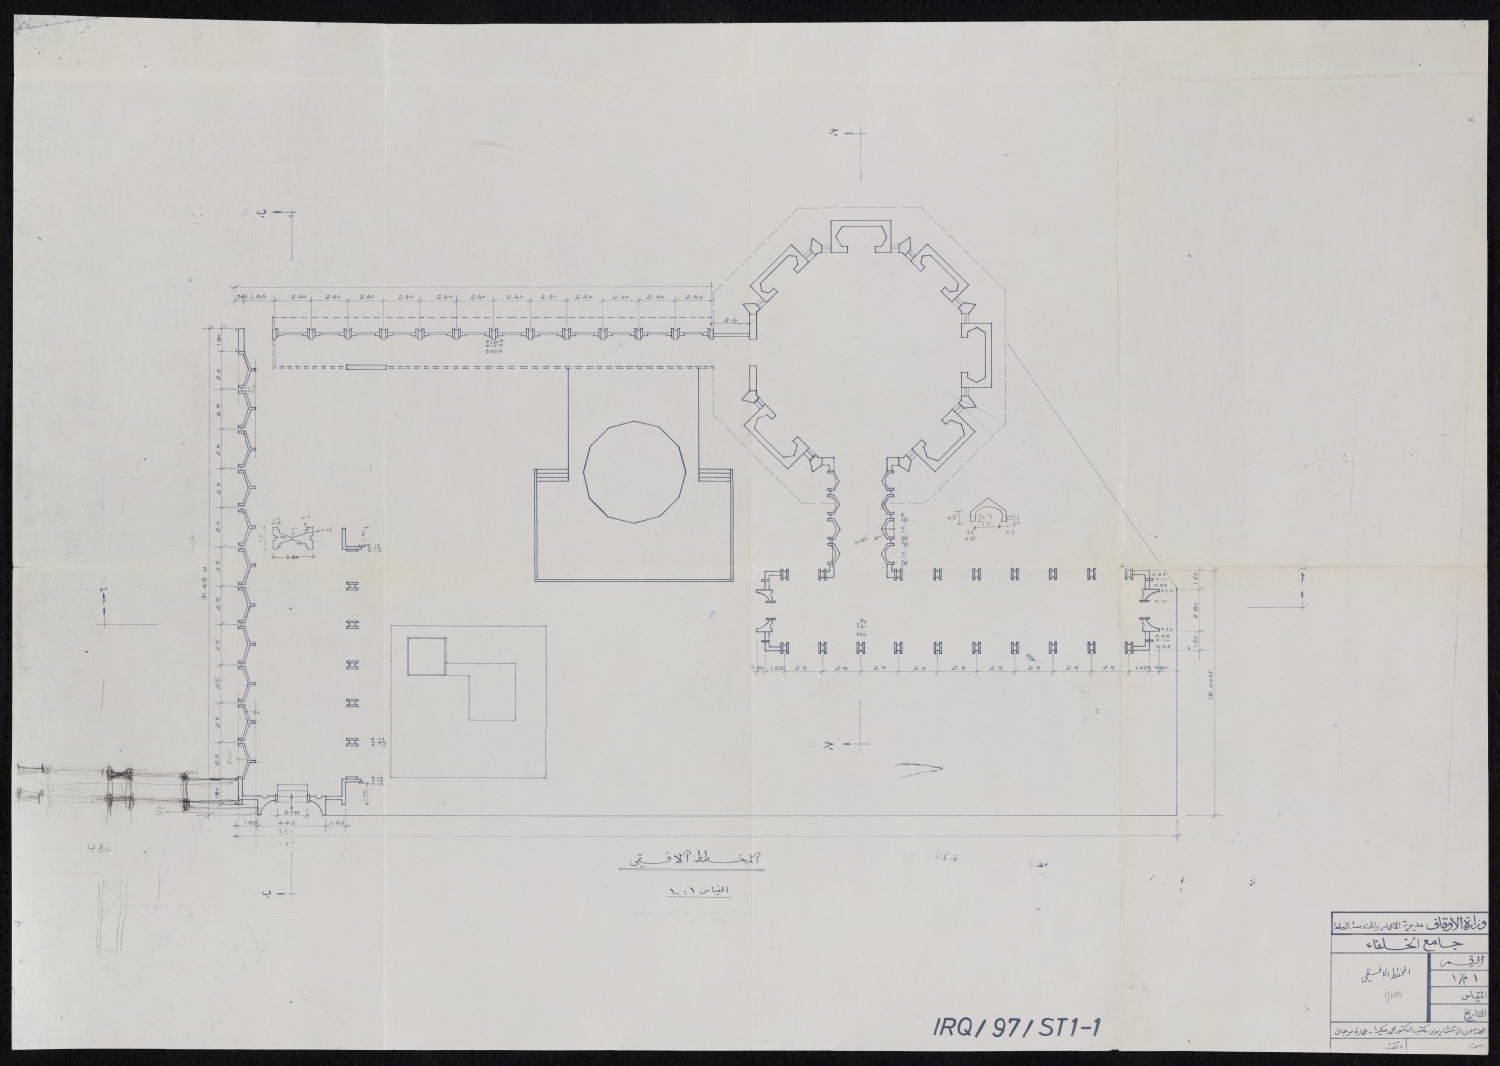 Plan, annotated in Arabic, with sketching and notations